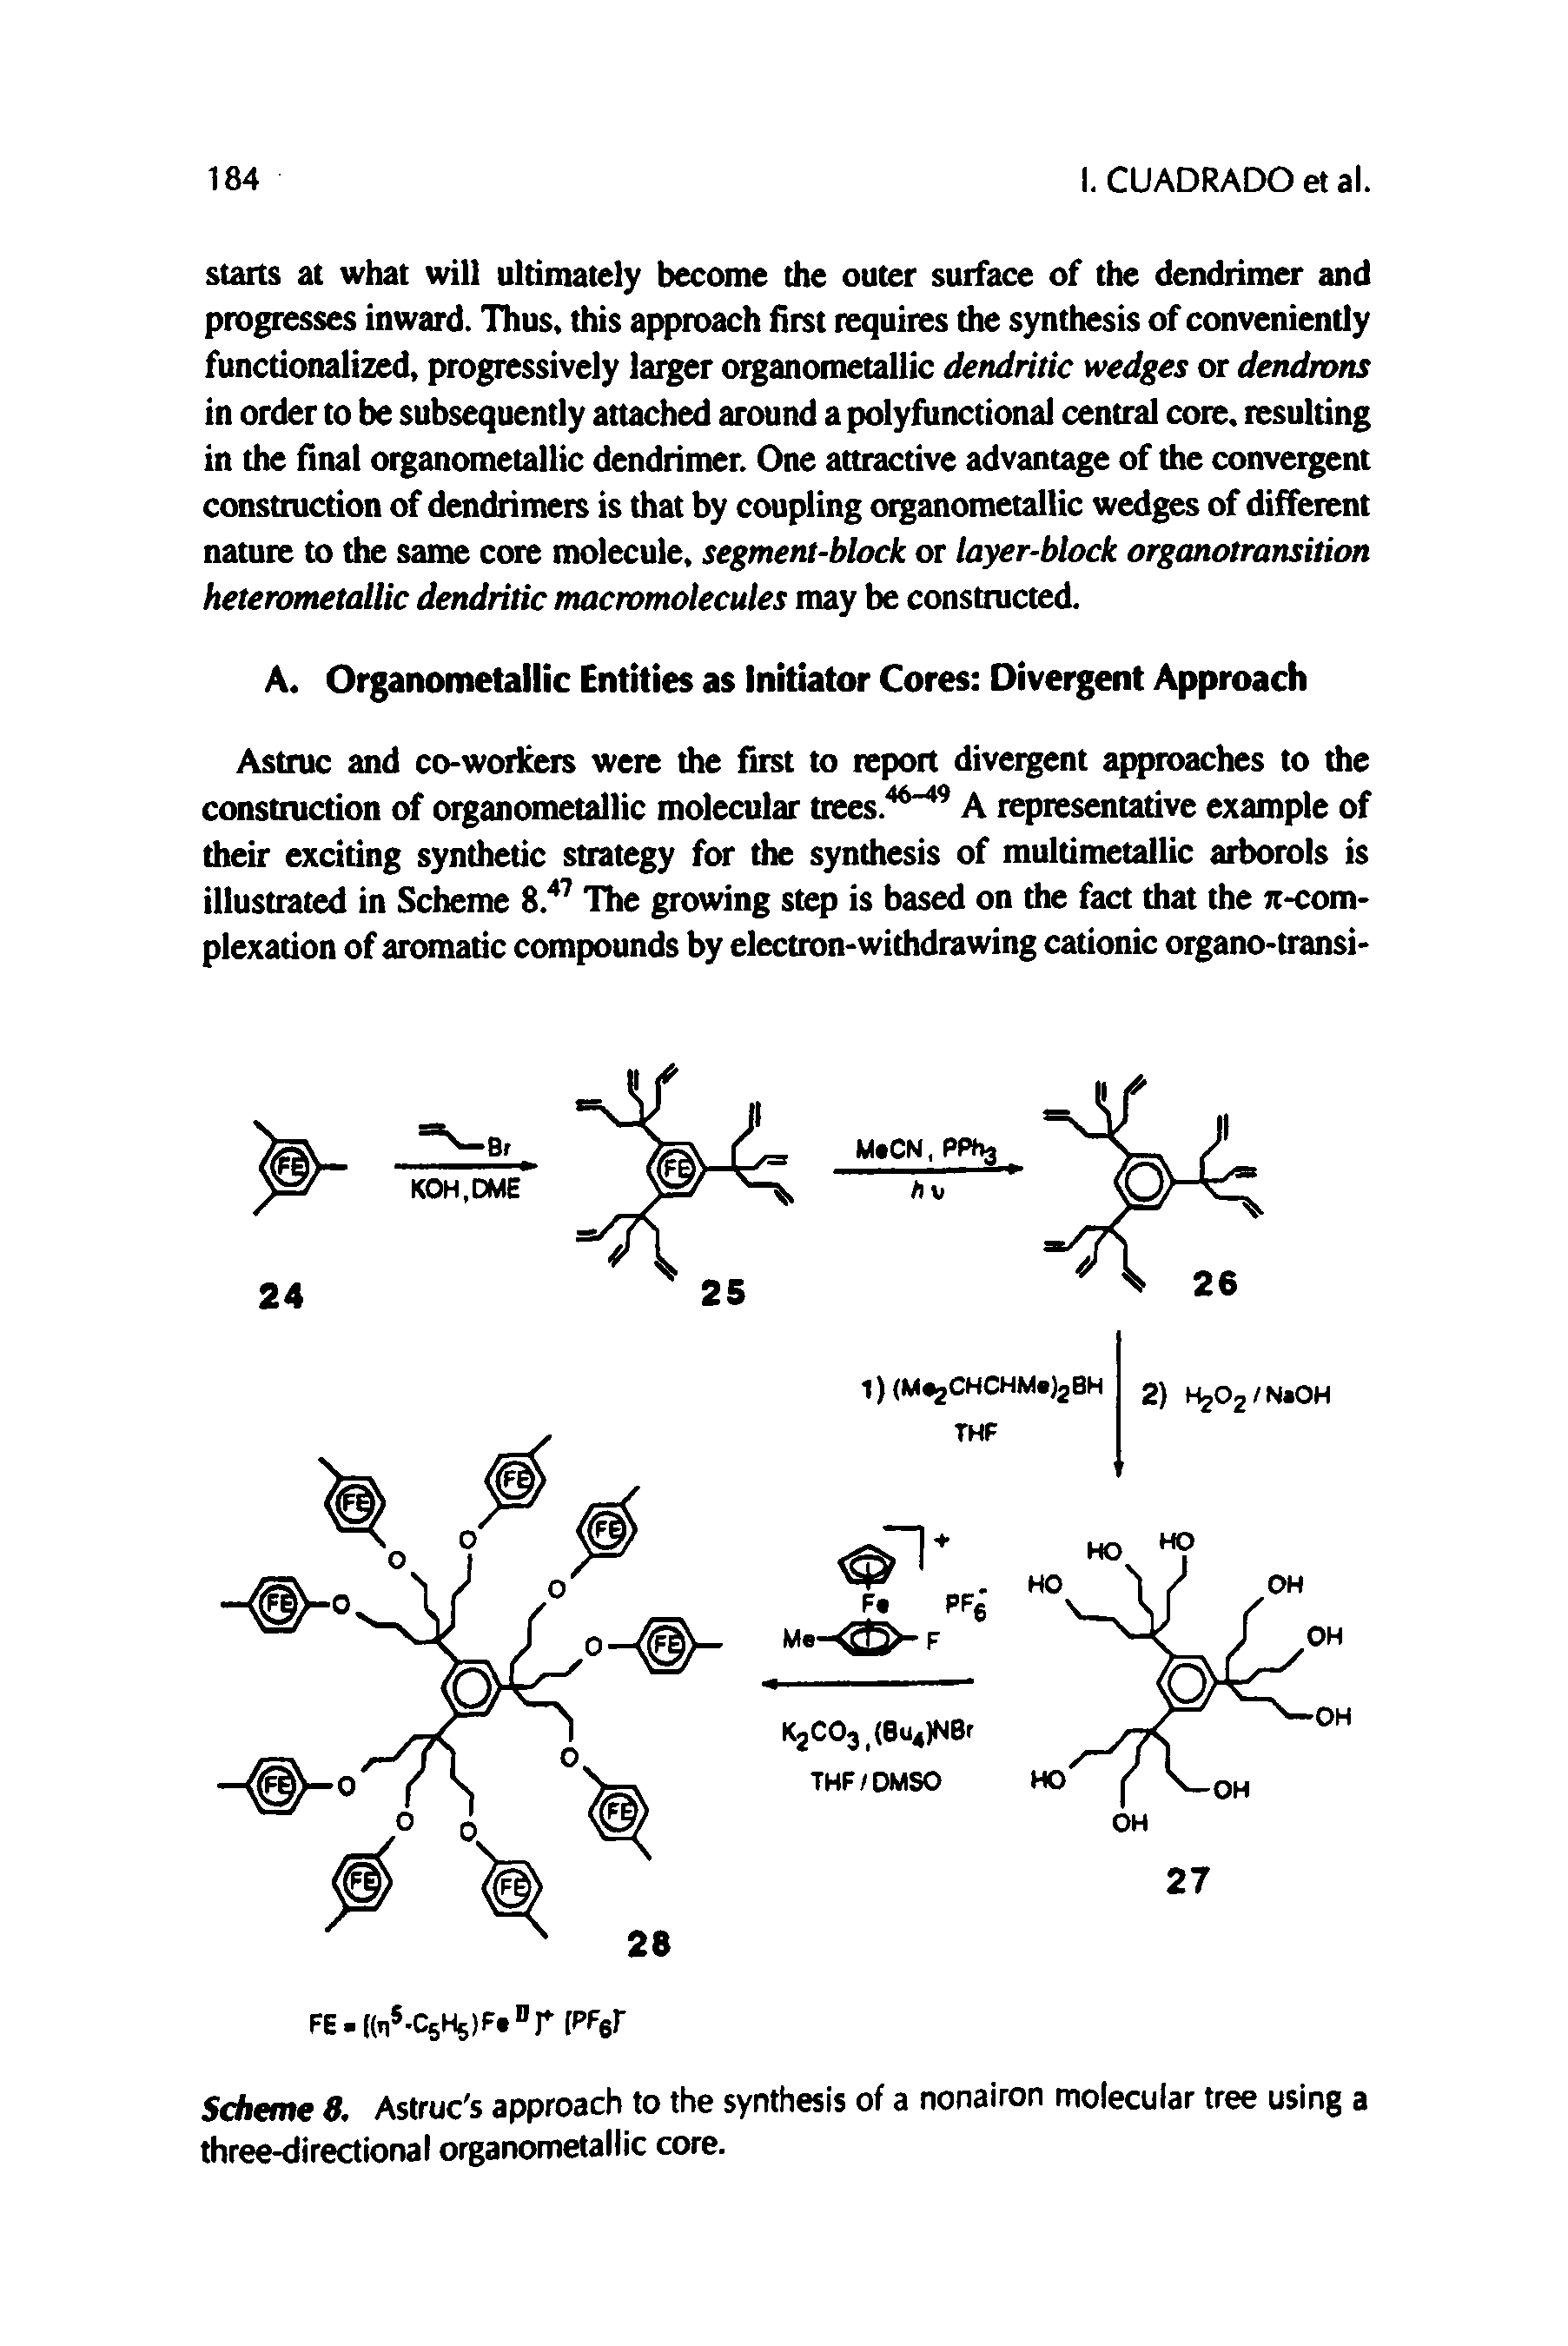 Scheme 8. Astruc s approach to the synthesis of a nonairon molecular tree using a three-directional organometallic core.